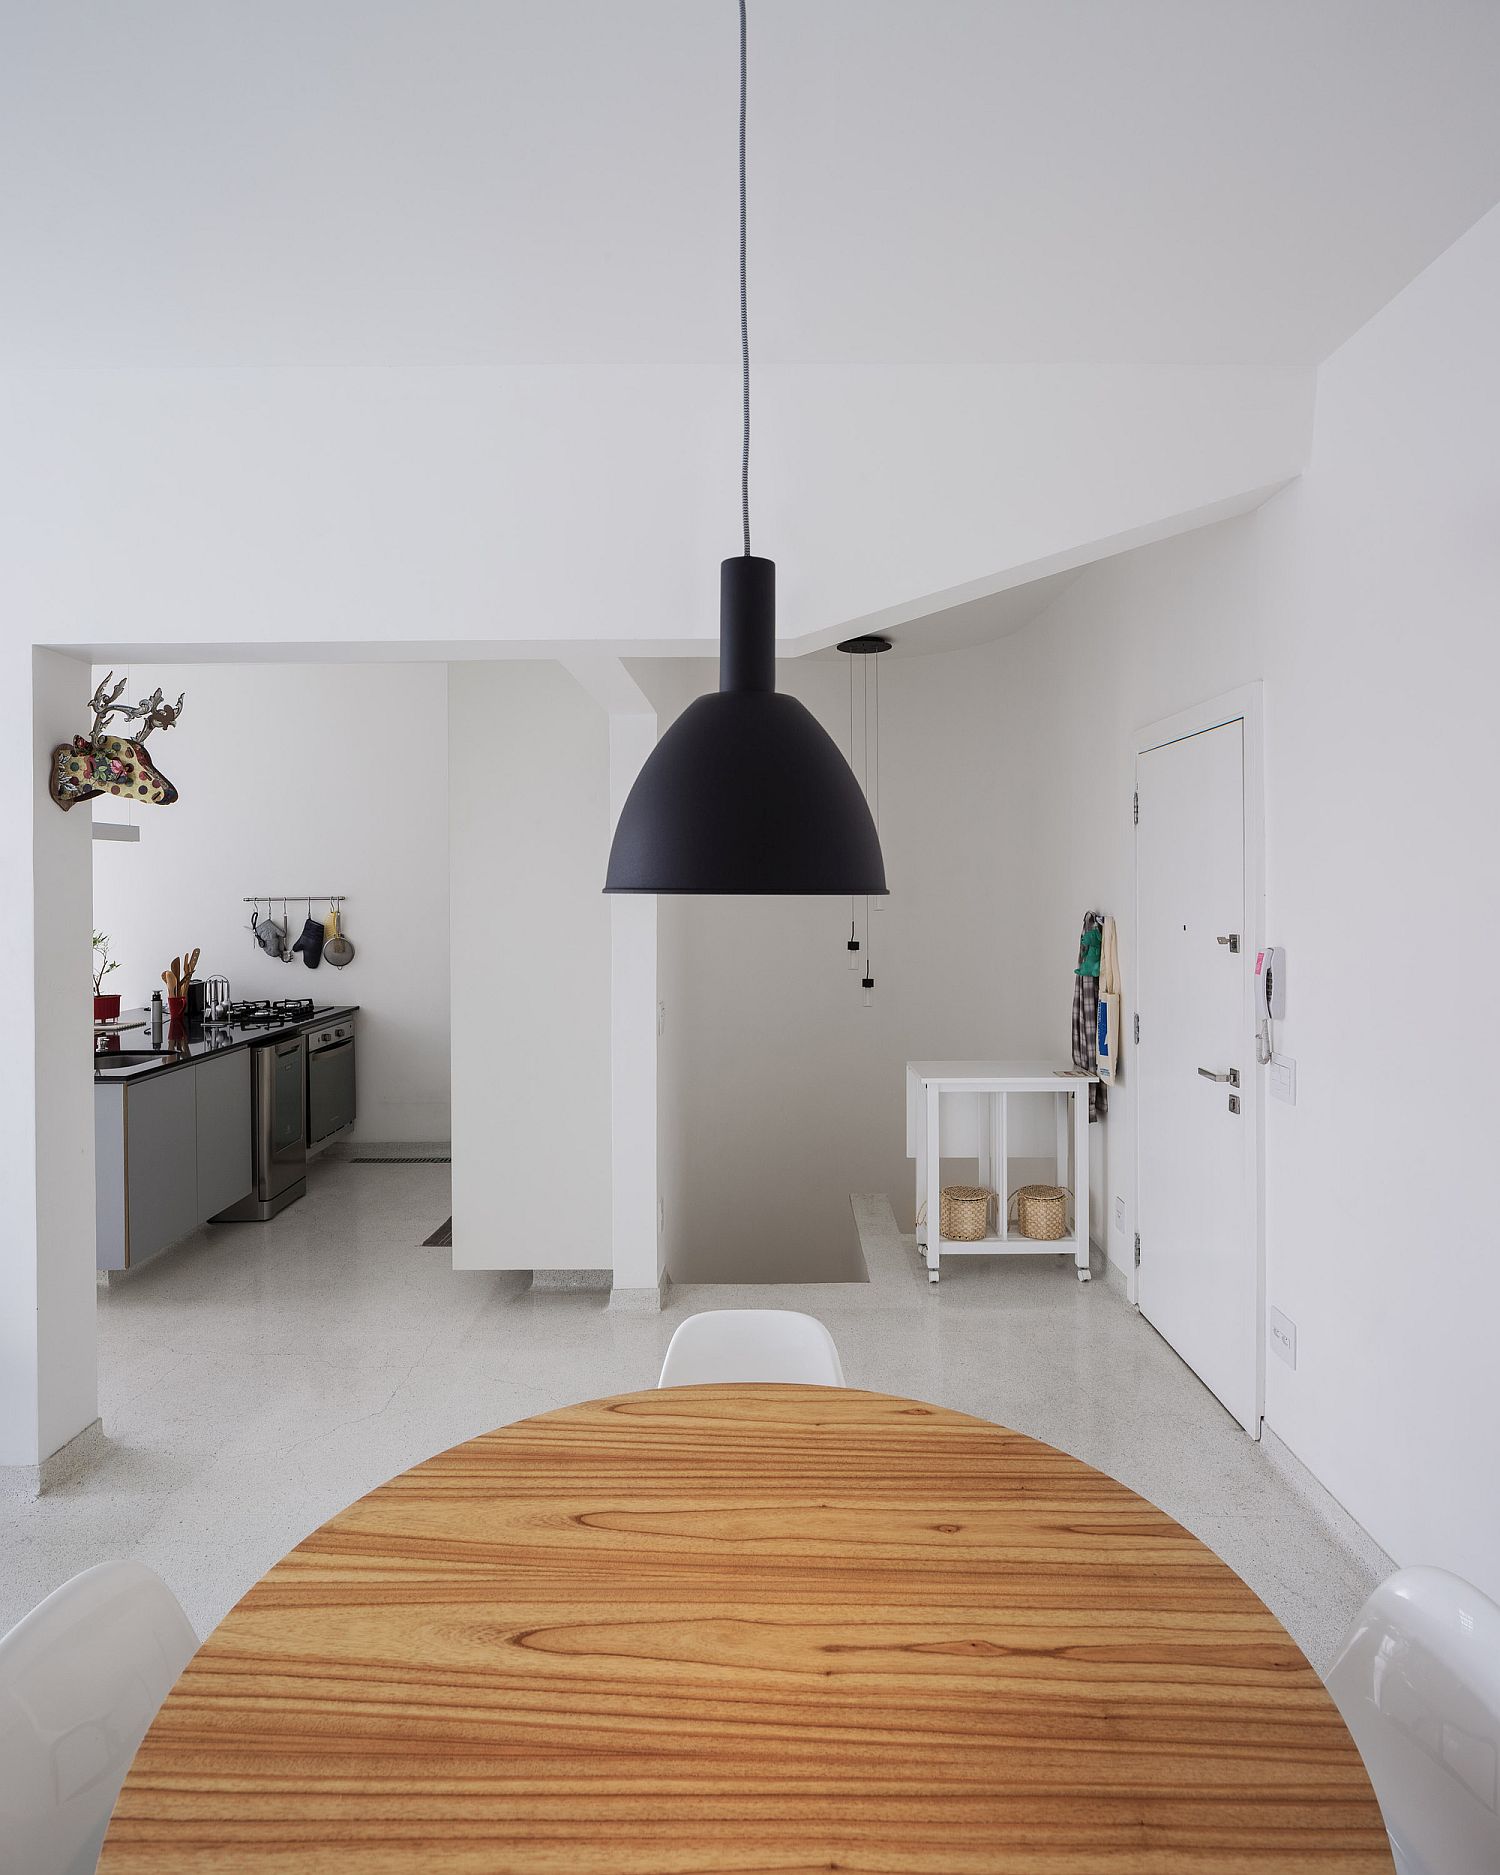 Dark-pendant-stands-out-visually-thanks-to-the-neutral-backdrop